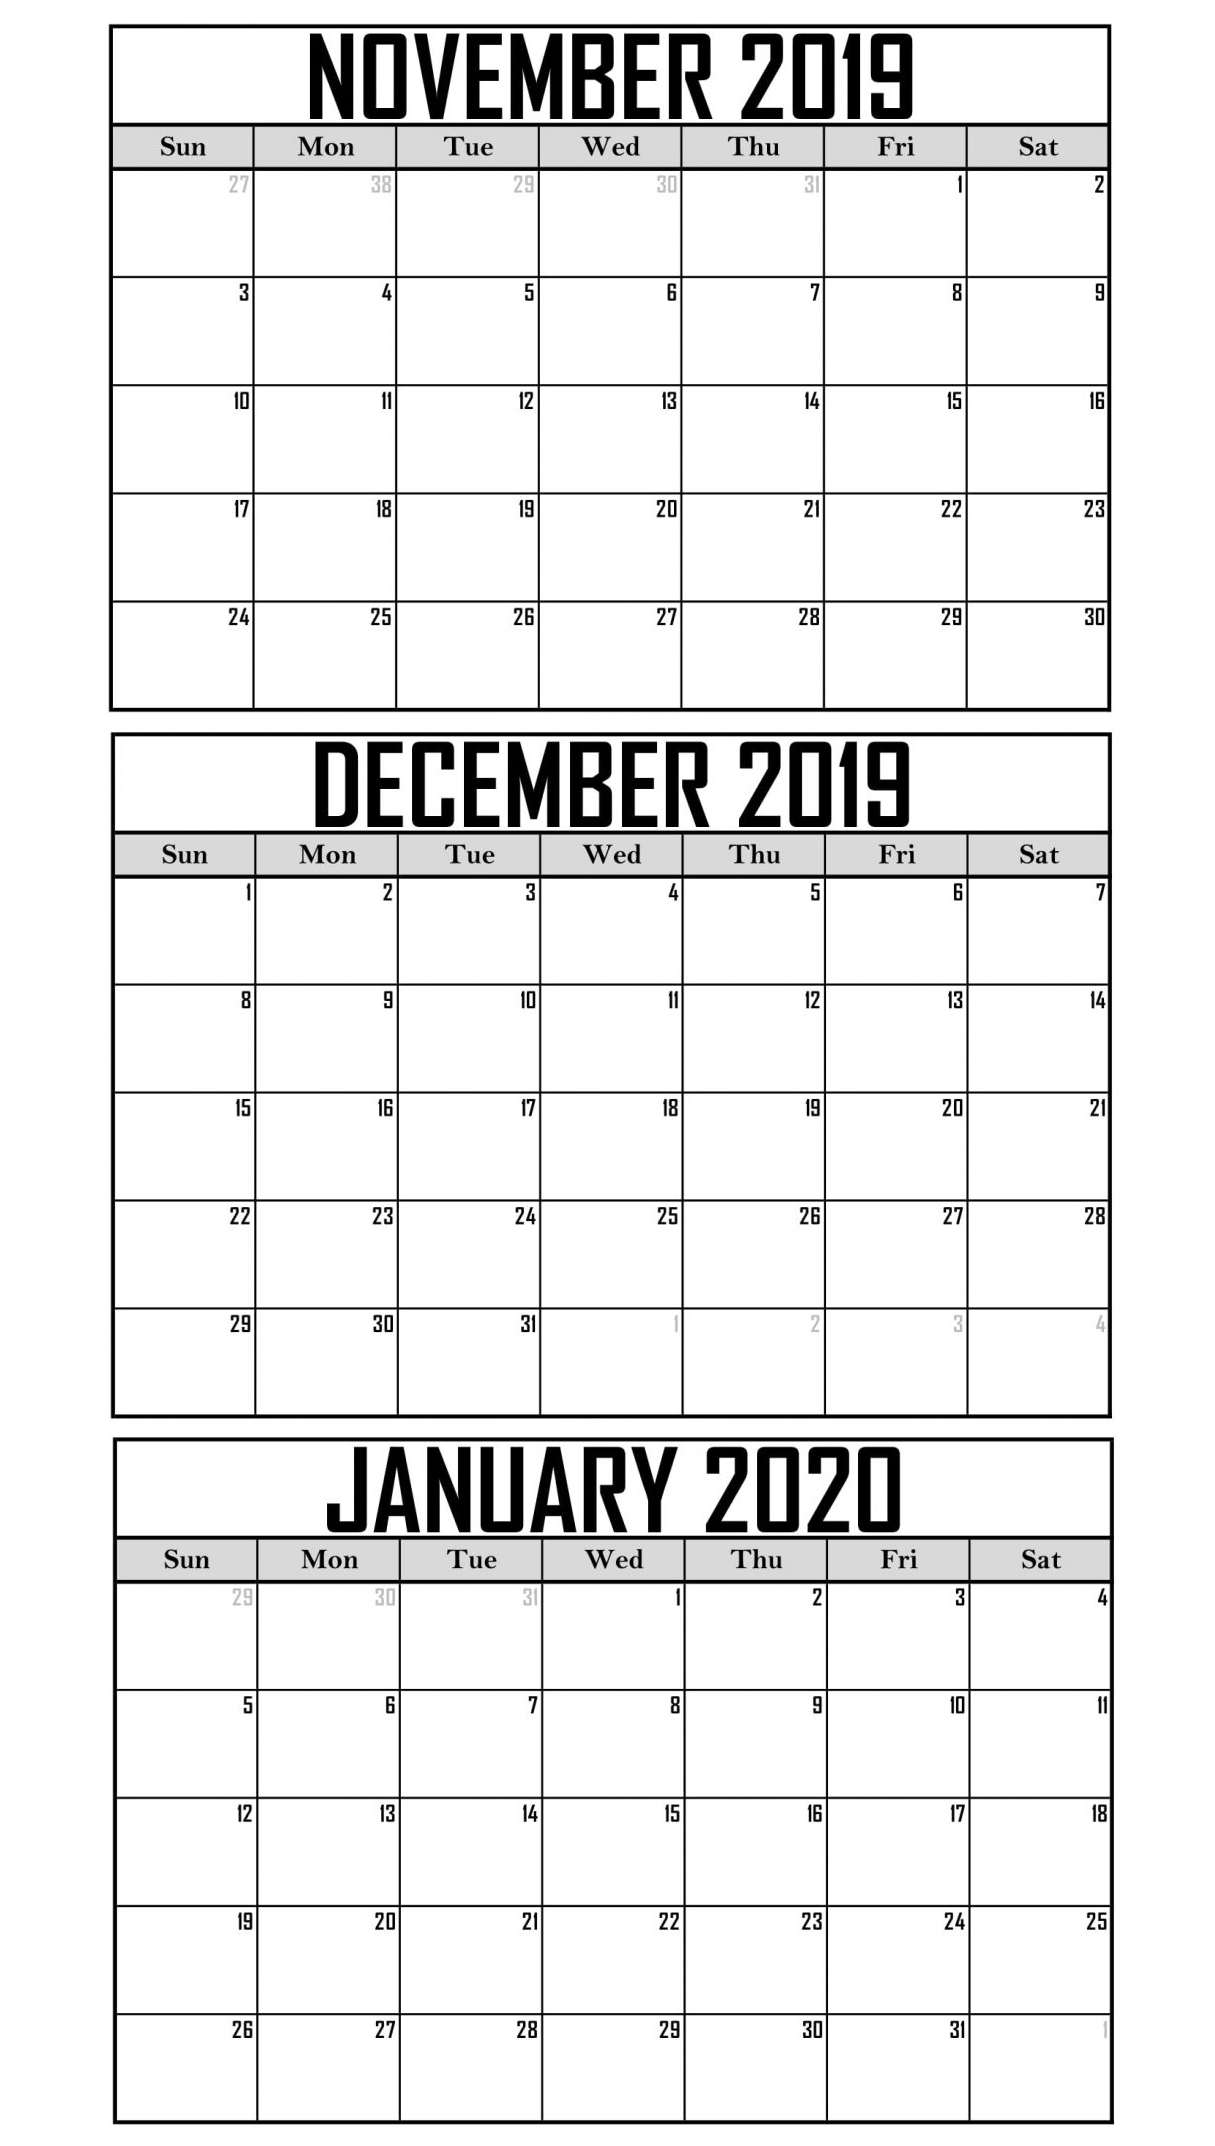 November 2019 To January 2020 Calendar Template  2019 with regard to November December January Calendar